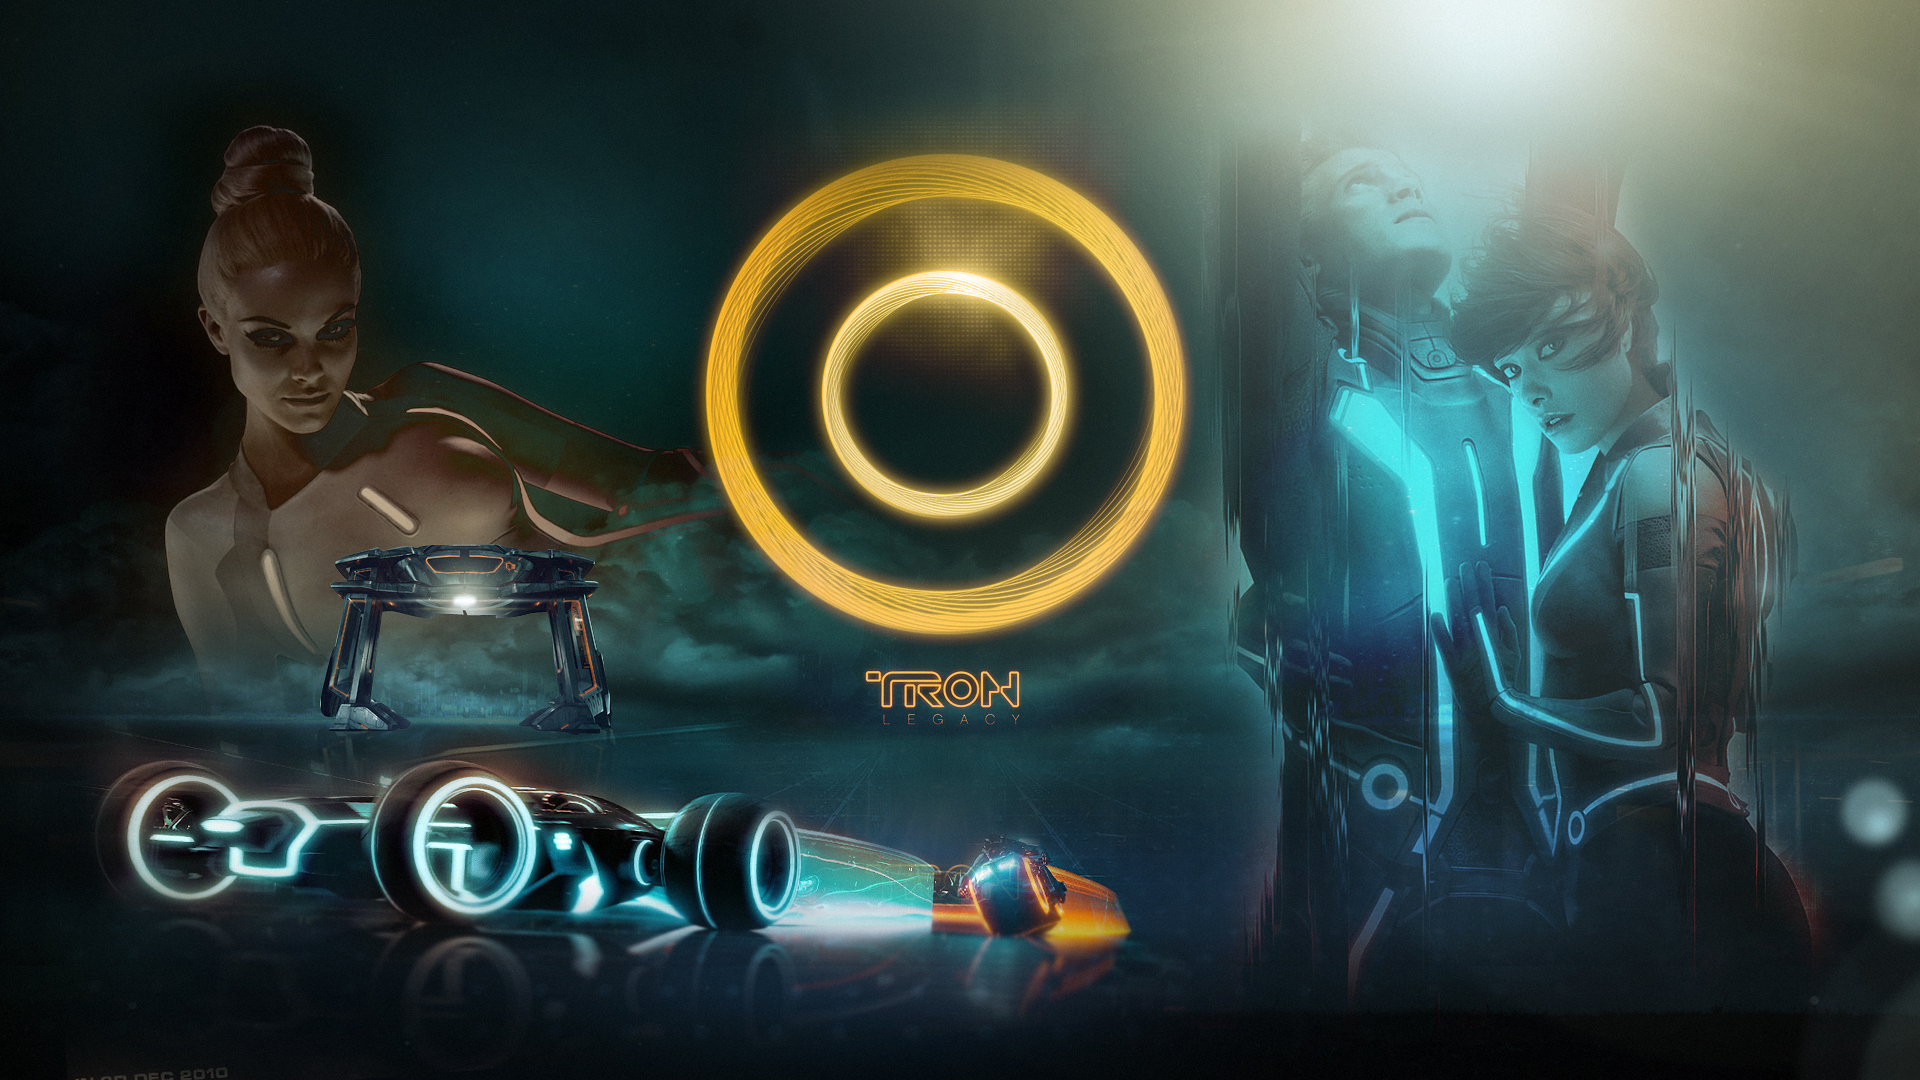 Movie TRON: Legacy HD Wallpaper | Background Image